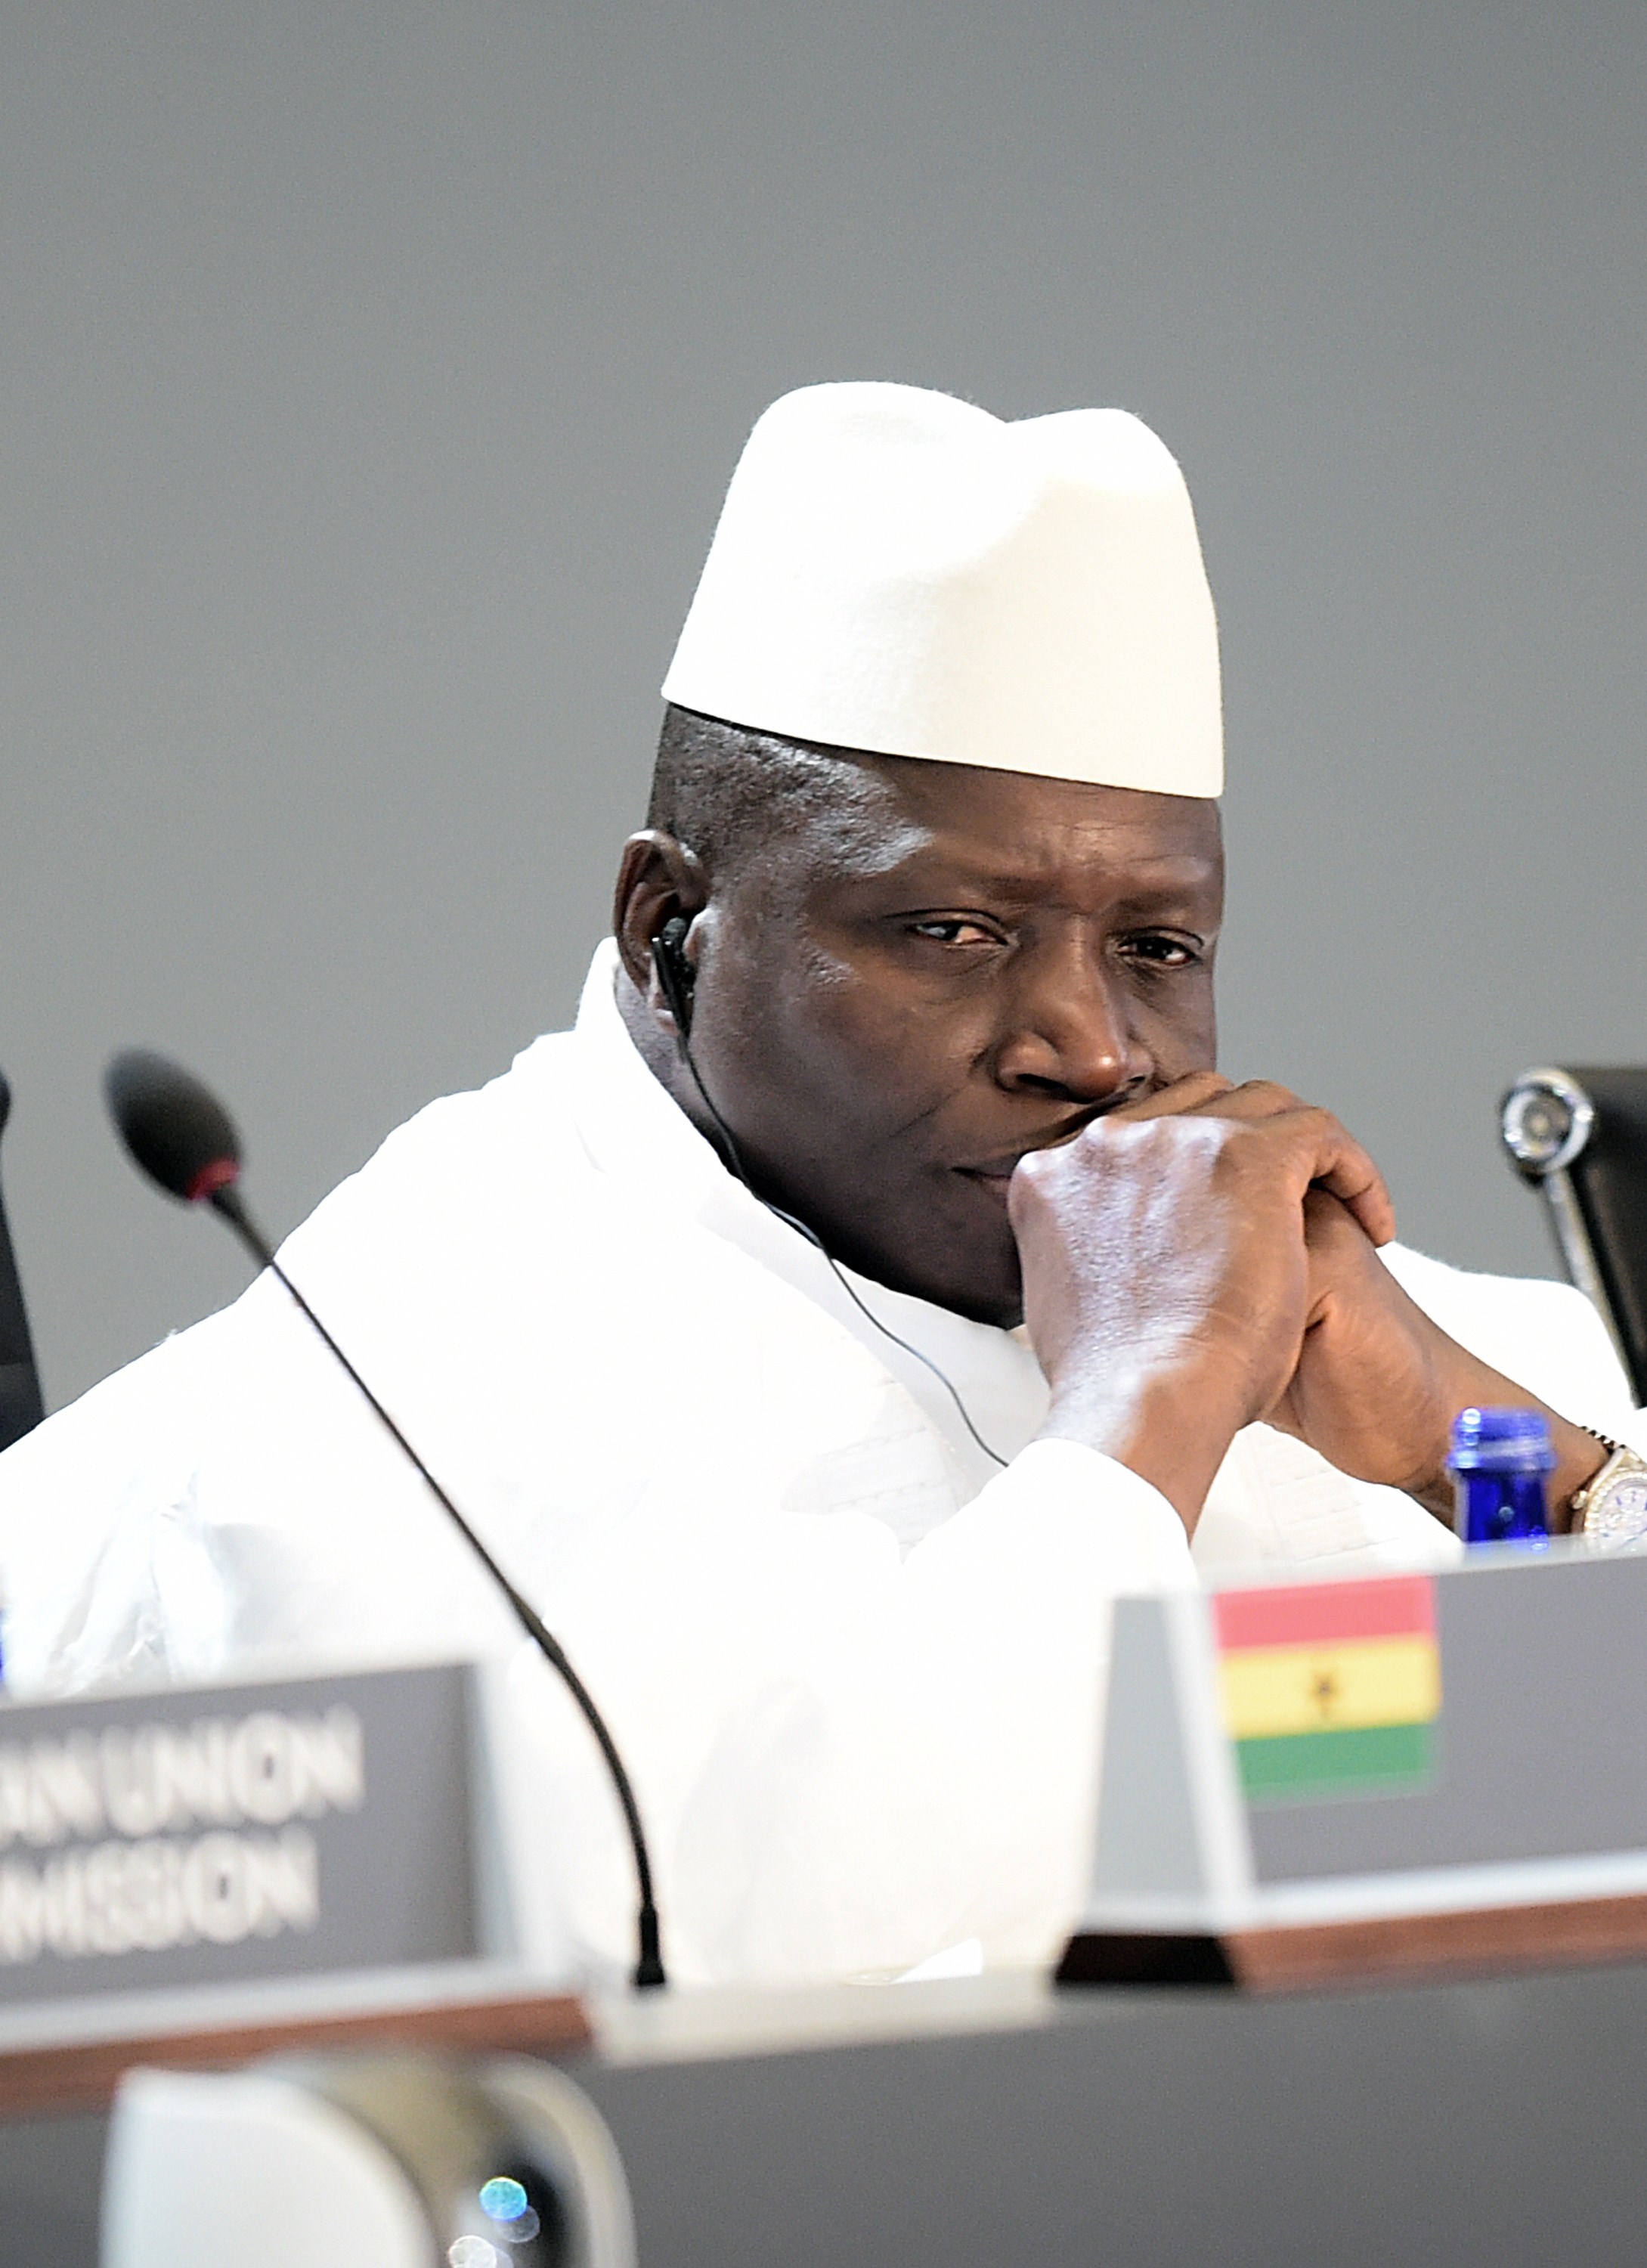 Gambia's President, Yahya Jammeh, attends the "Session 1- Investing in Africas Future" of the US-Africa Leaders Summit in Washington DC on Aug. 6, 2014. (Jim Watson—AFP/Getty Images)